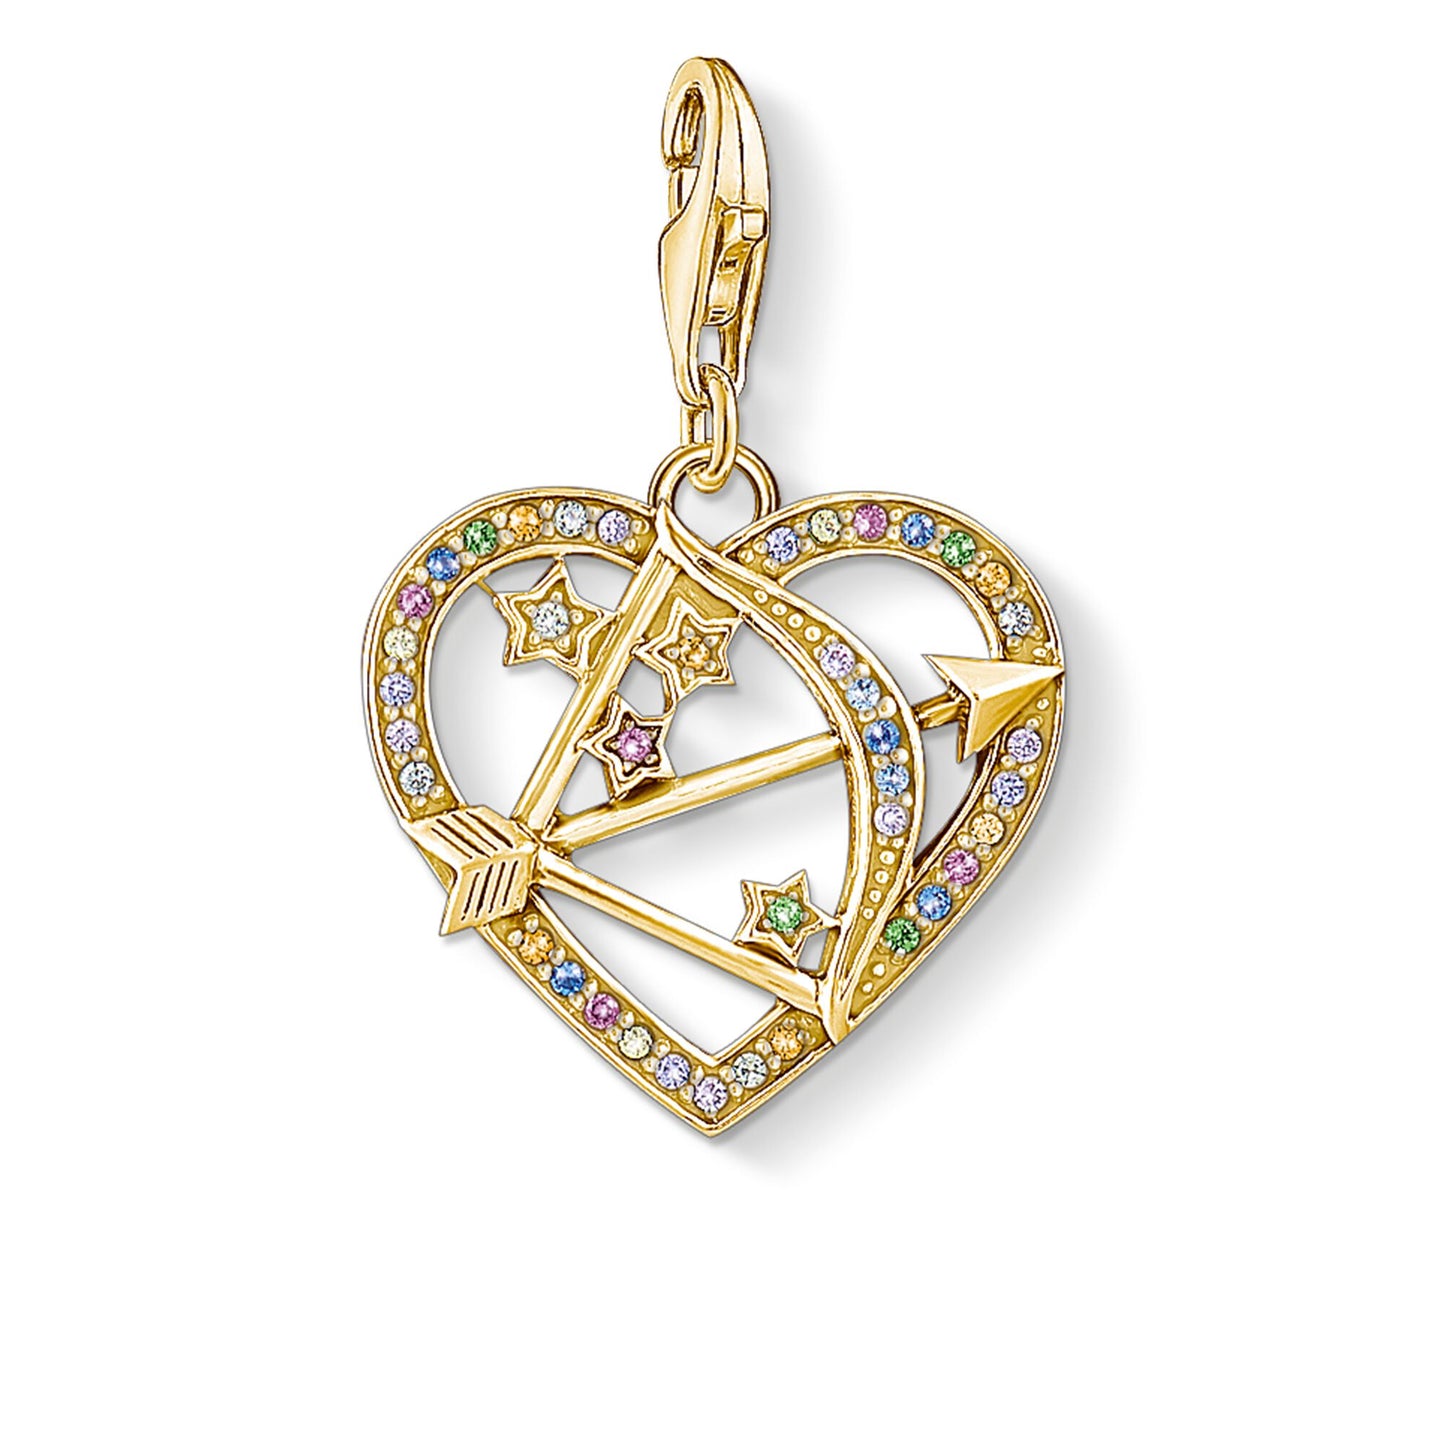 CHARM CLUB STERLING SILVER YELLOW GOLD PLATED CUPIDS ARROW HEART CHARM